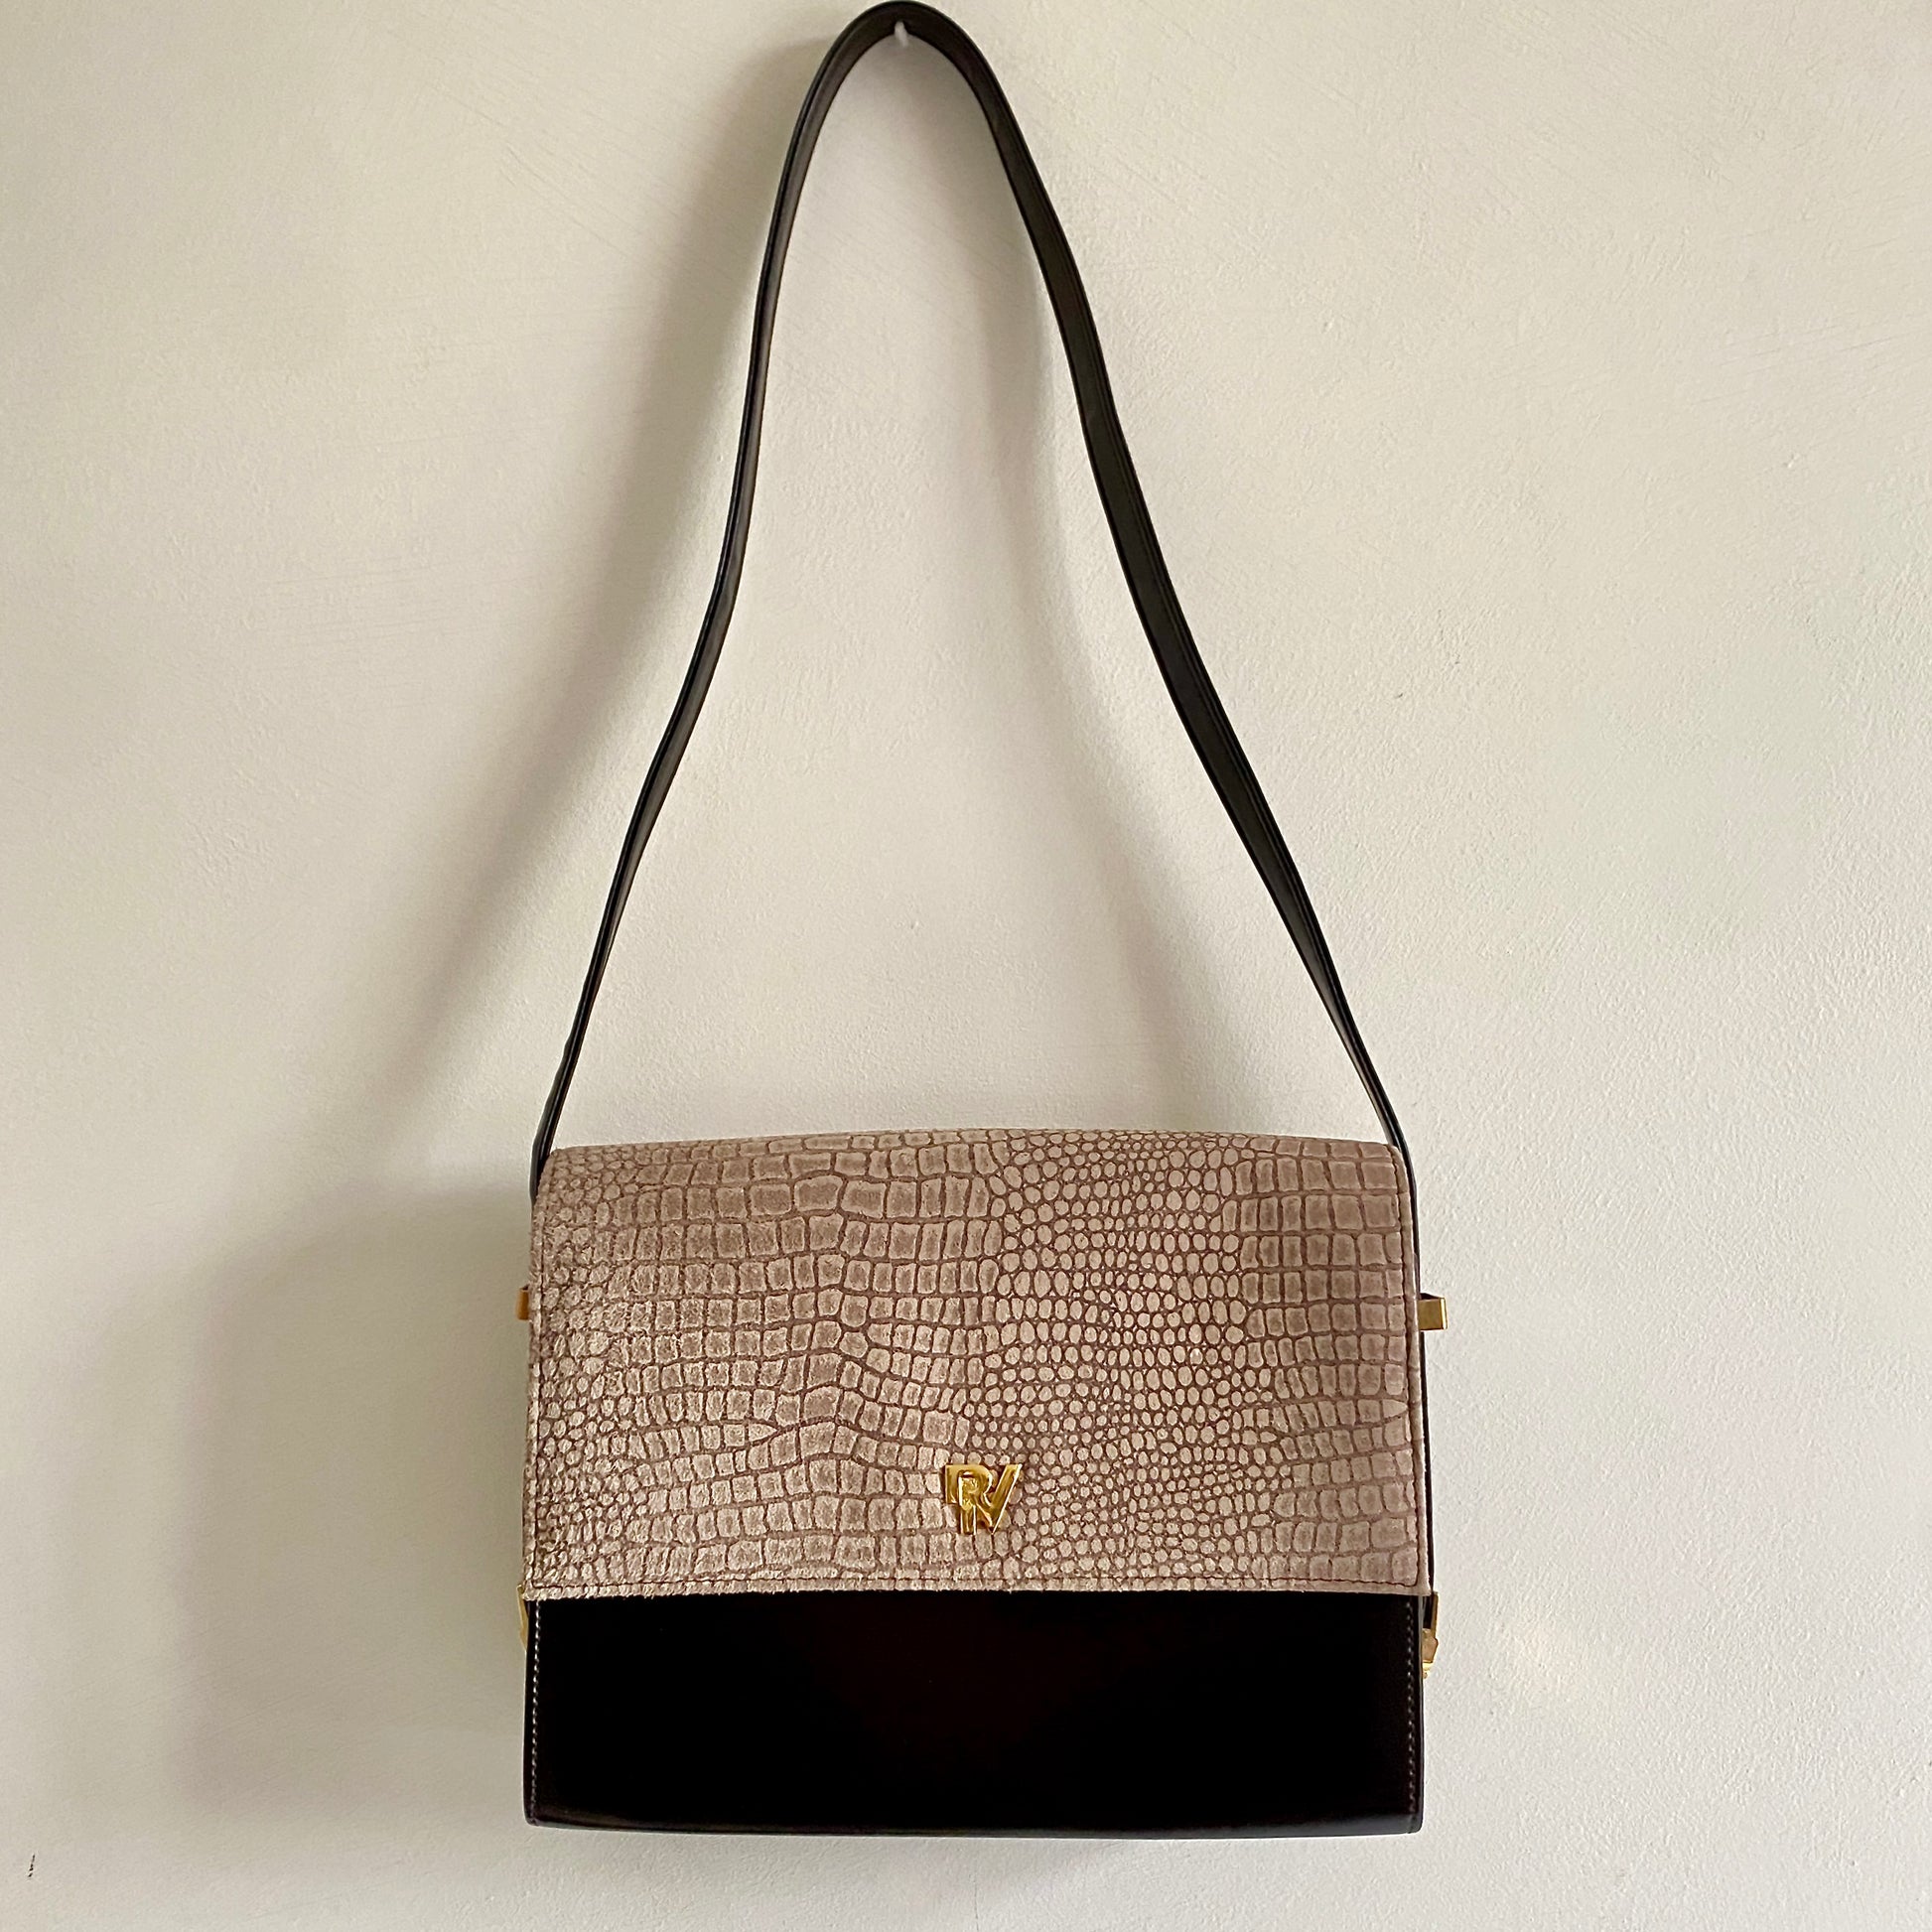 Late 80s dark brown vintage shoulder bag Contrast flap closure with magnetic press stud fastening  Shoulder strap measures 32" Gold tone hardware Three inner compartments (one with zip closure) Back pocket